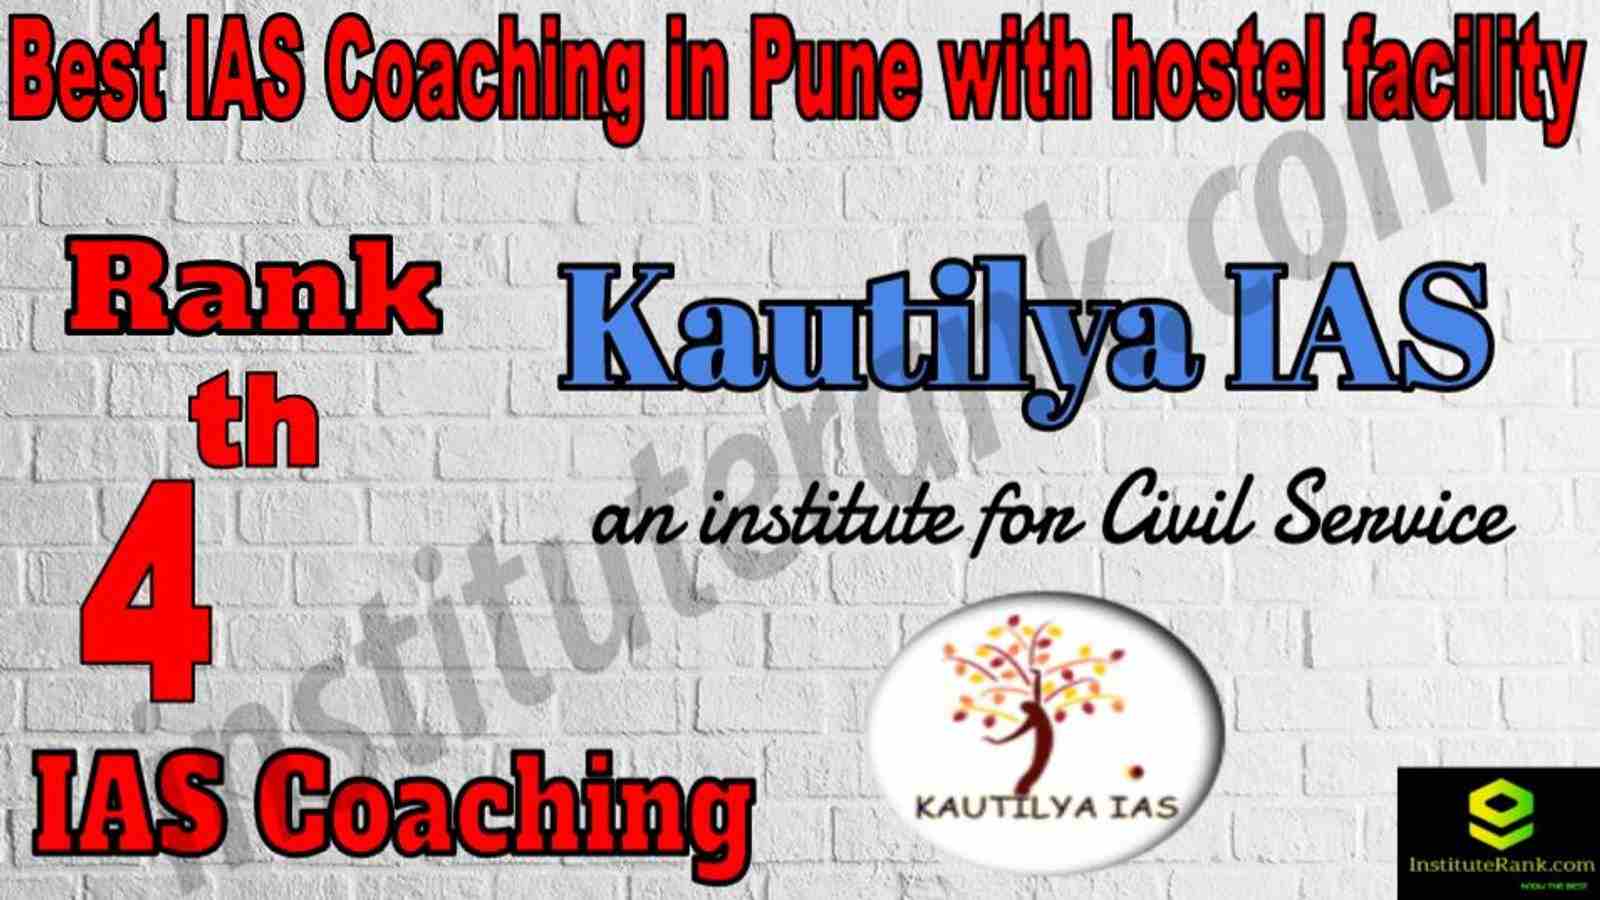 4th Best IAS Coaching in Pune with hostel facility